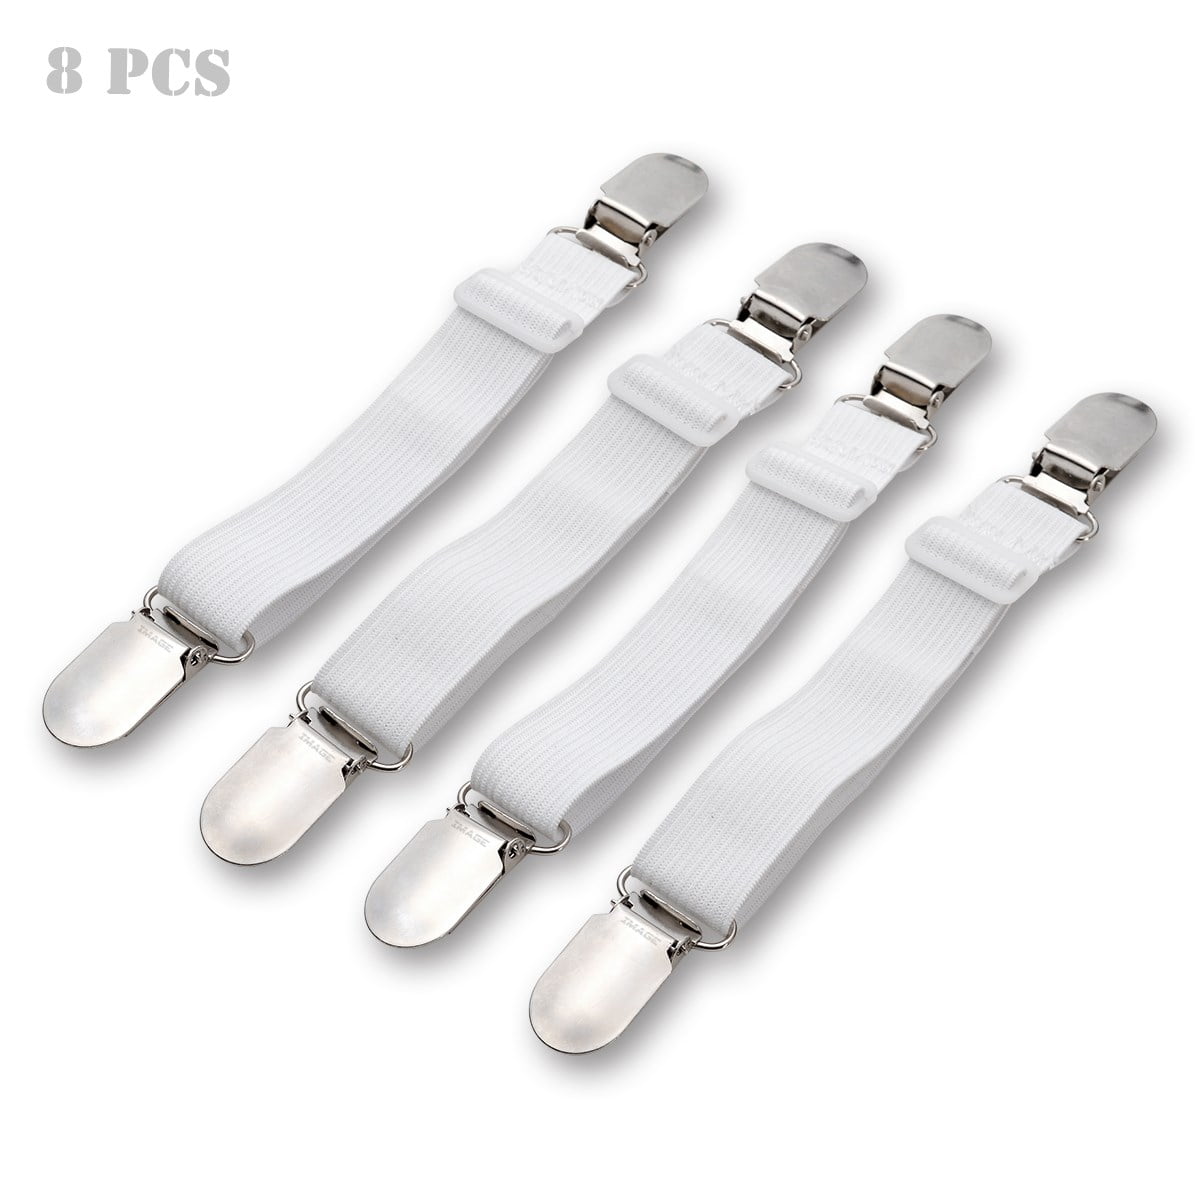 Korlon 4 Pack Adjustable Heavy Duty Bed Sheet Clips, Cover Grippers  Suspenders Holder Bed Sheet Fasteners